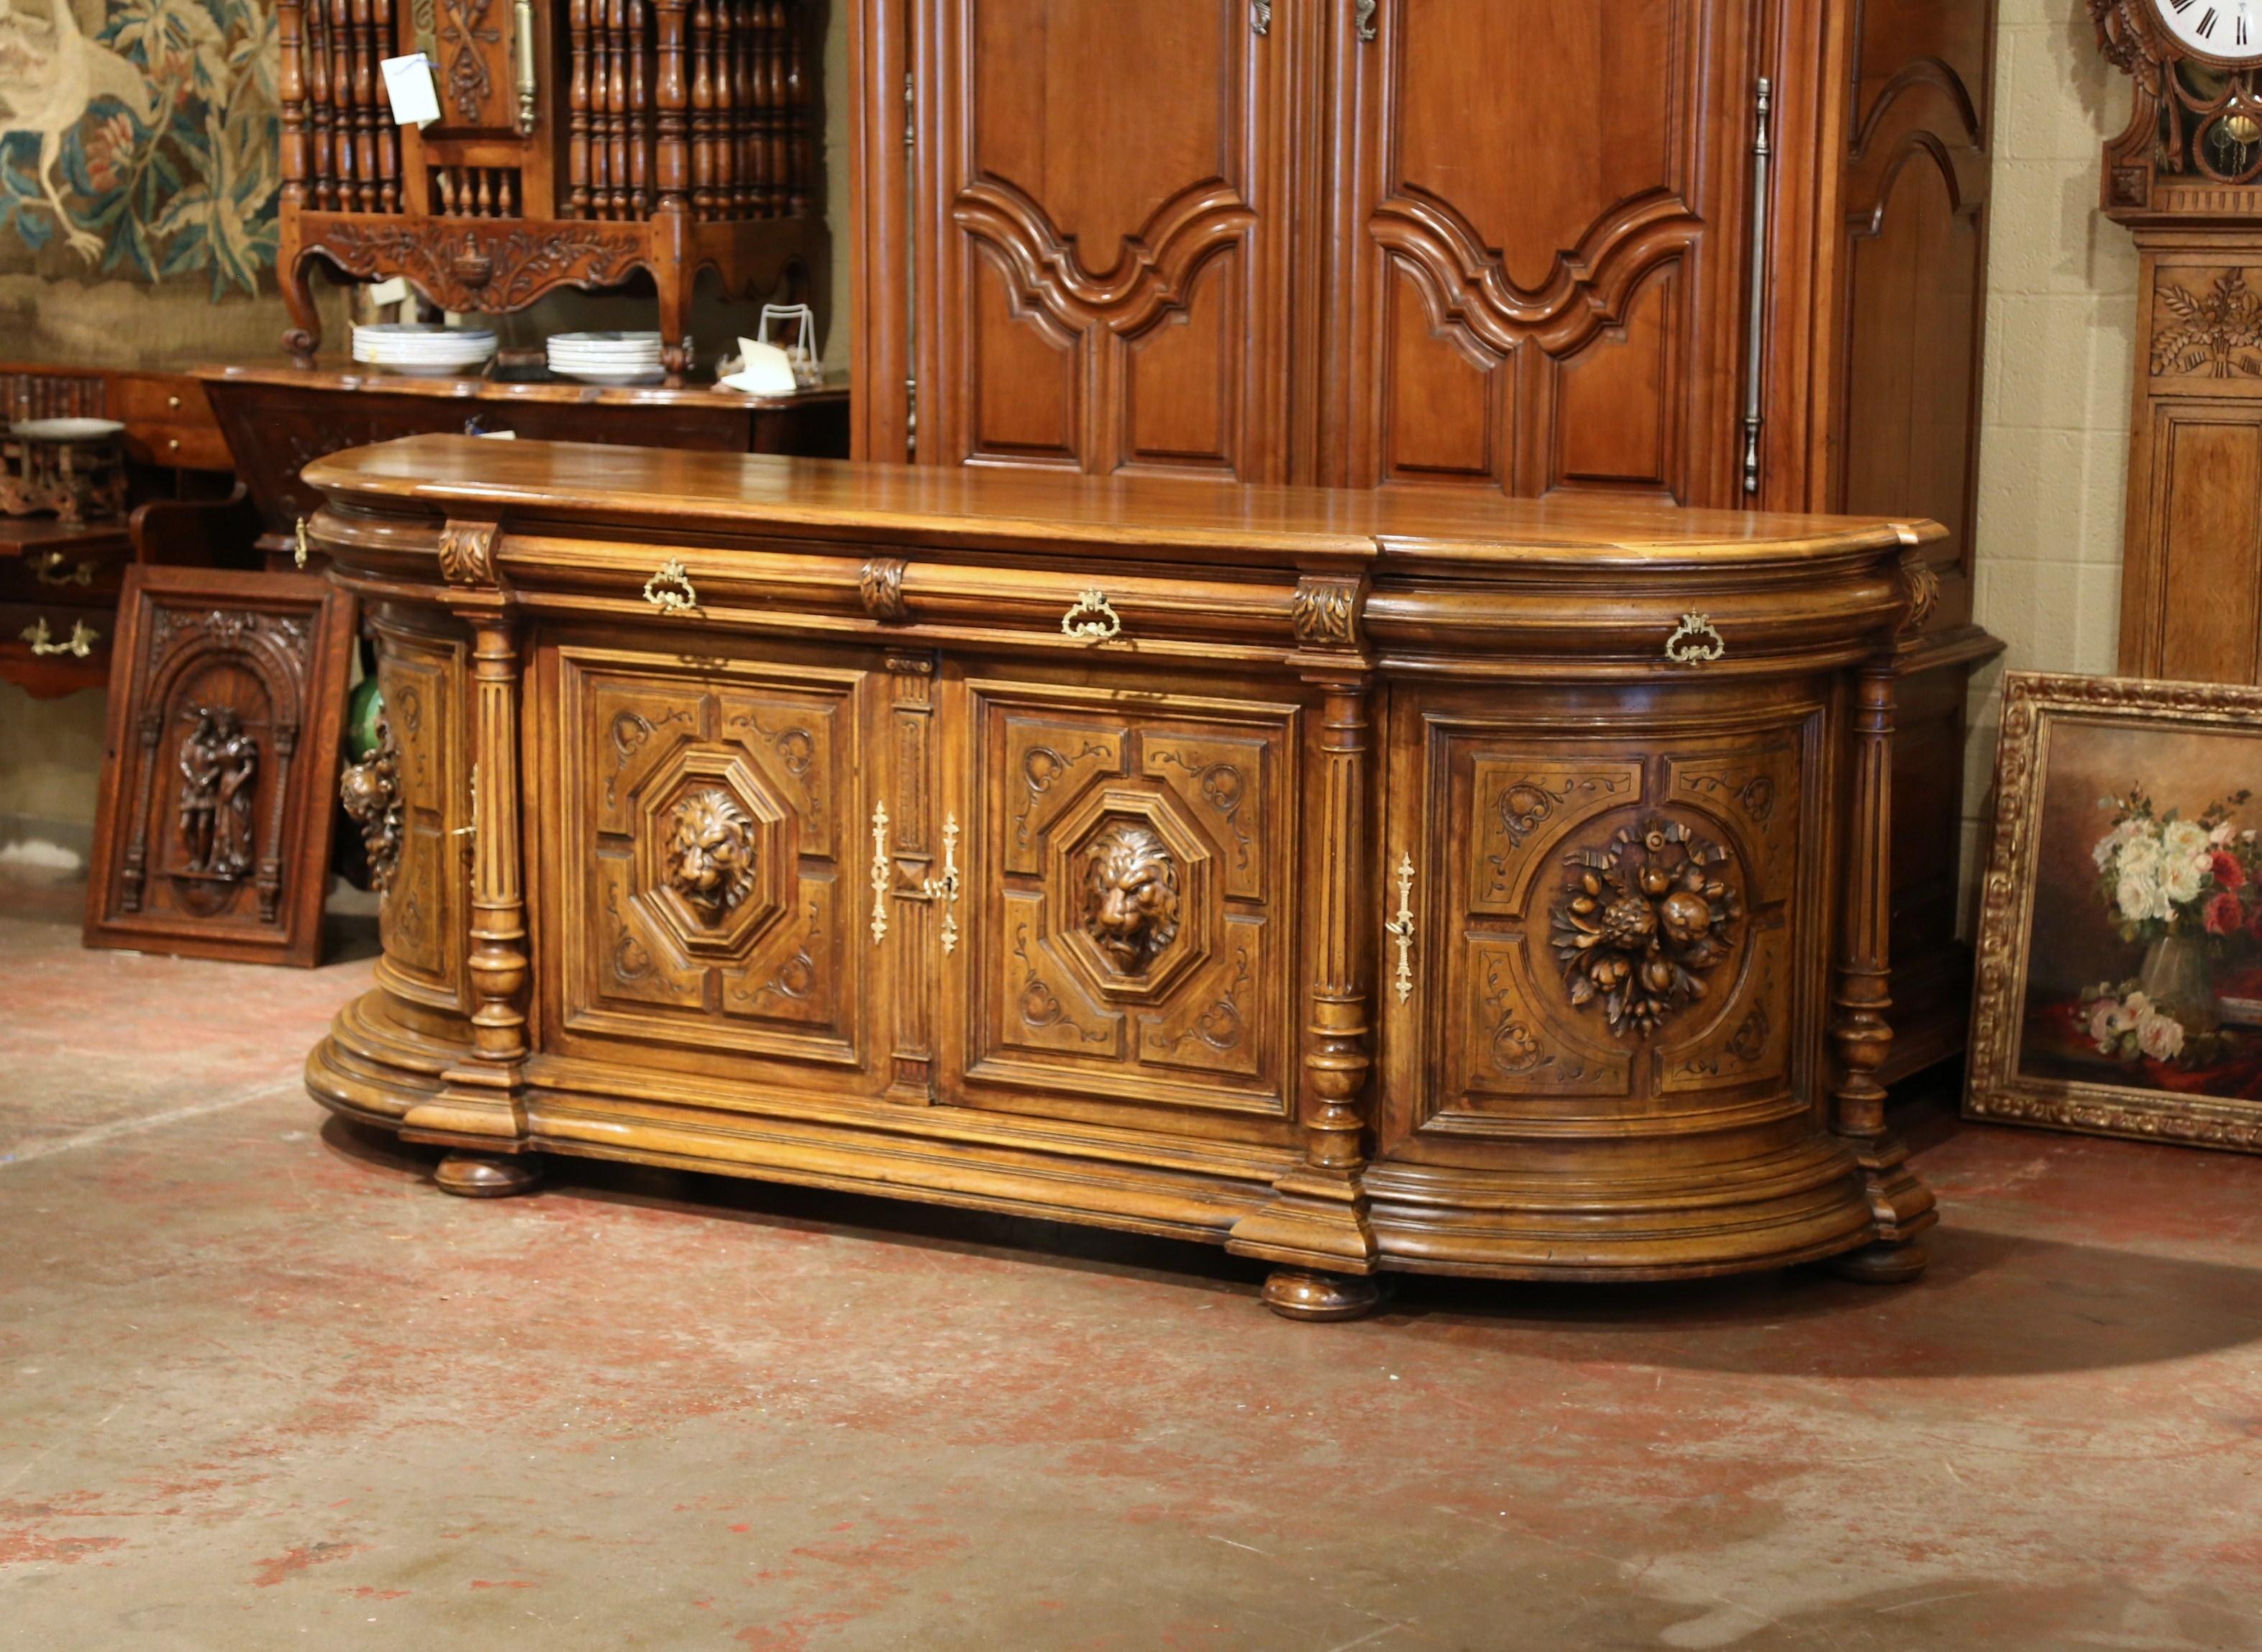 Add both surface and storage space in your dining room with this large buffet serving piece. Crafted in France circa 1860, the long, fruitwood cabinet sits on bun feet and features four doors and four drawers with decorative brass pulls. The piece